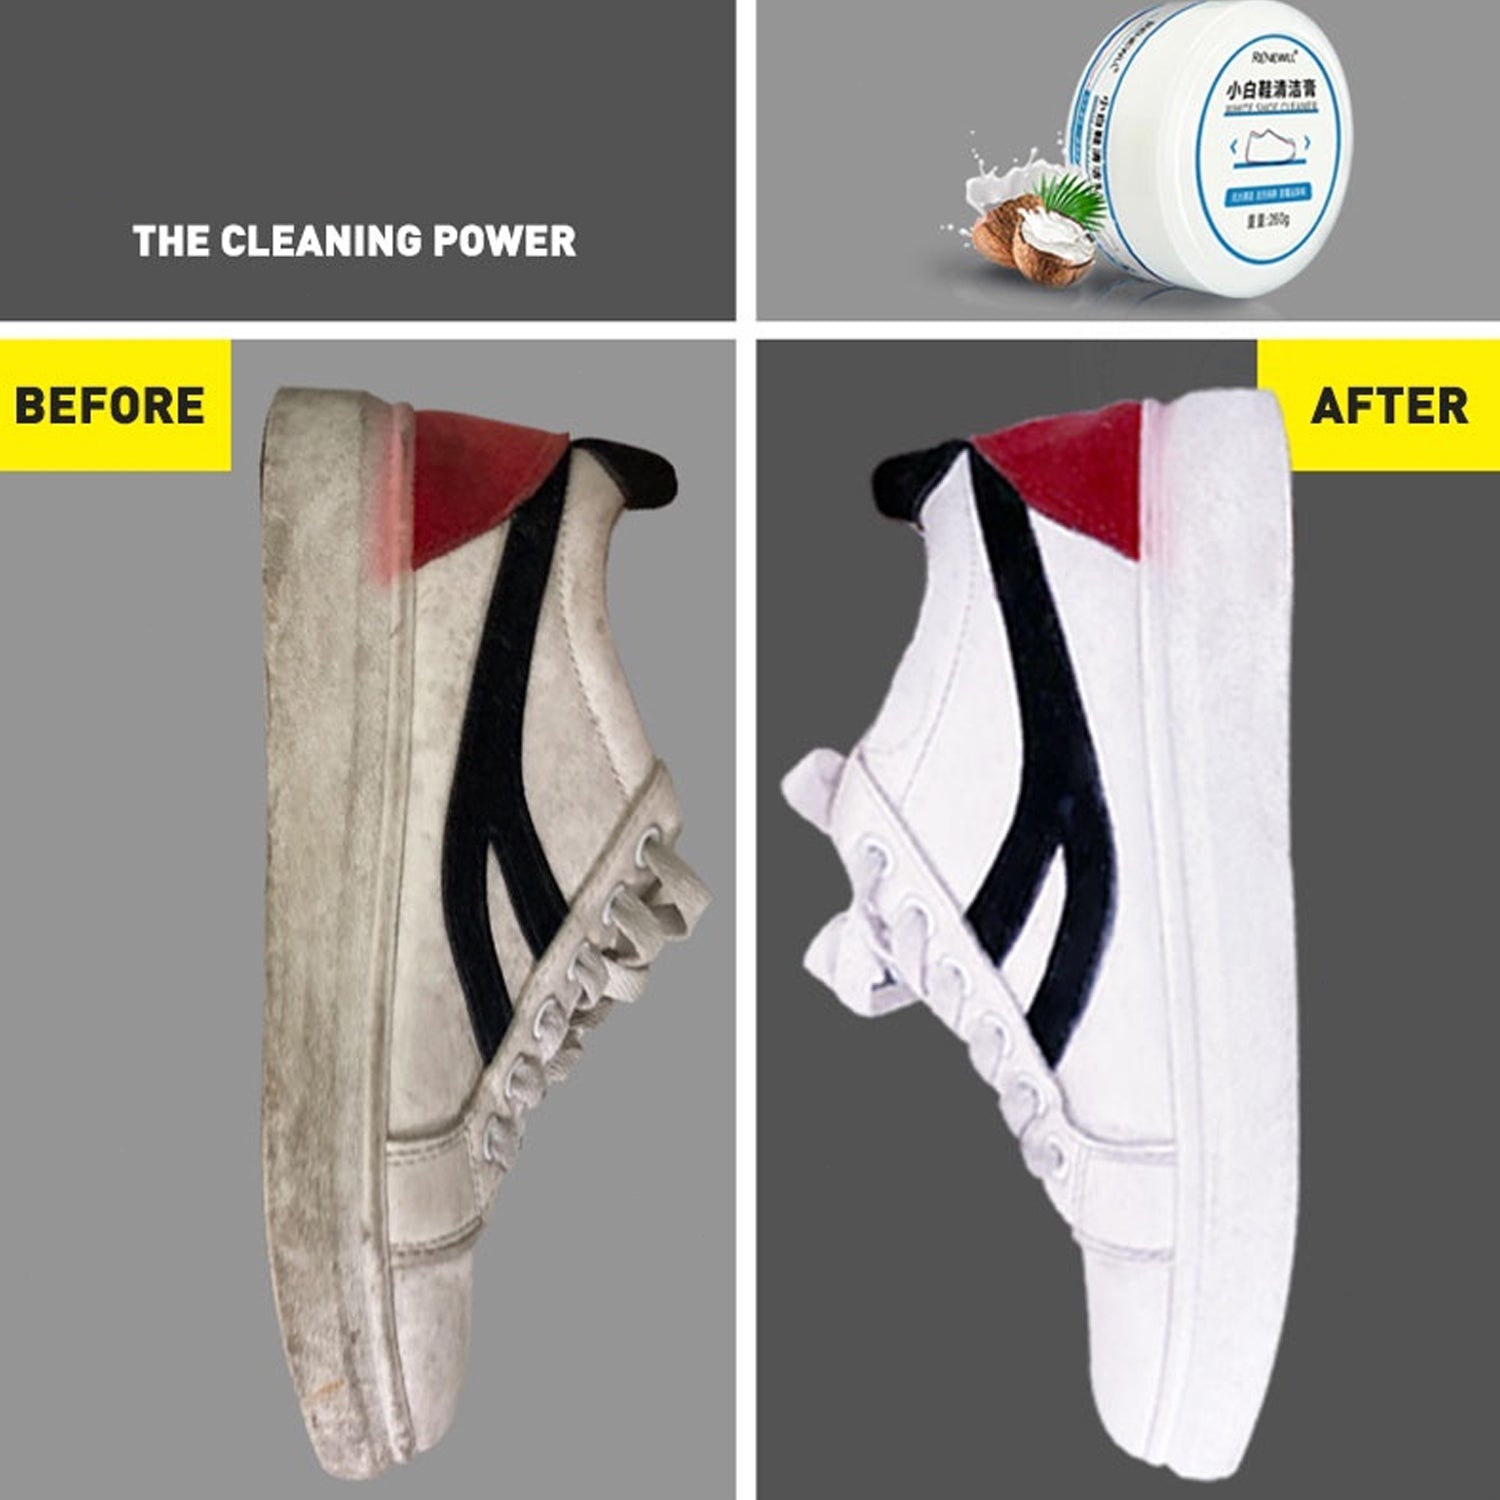 17733 Stain Remover Cleansing Cream for Shoe Polish Sneaker Cleaning Kit Shoe Eraser Stain Remover White Rubber Sole Shoe Cleaner White Shoe Cleaning Cream Stain Remover (260 Gm)